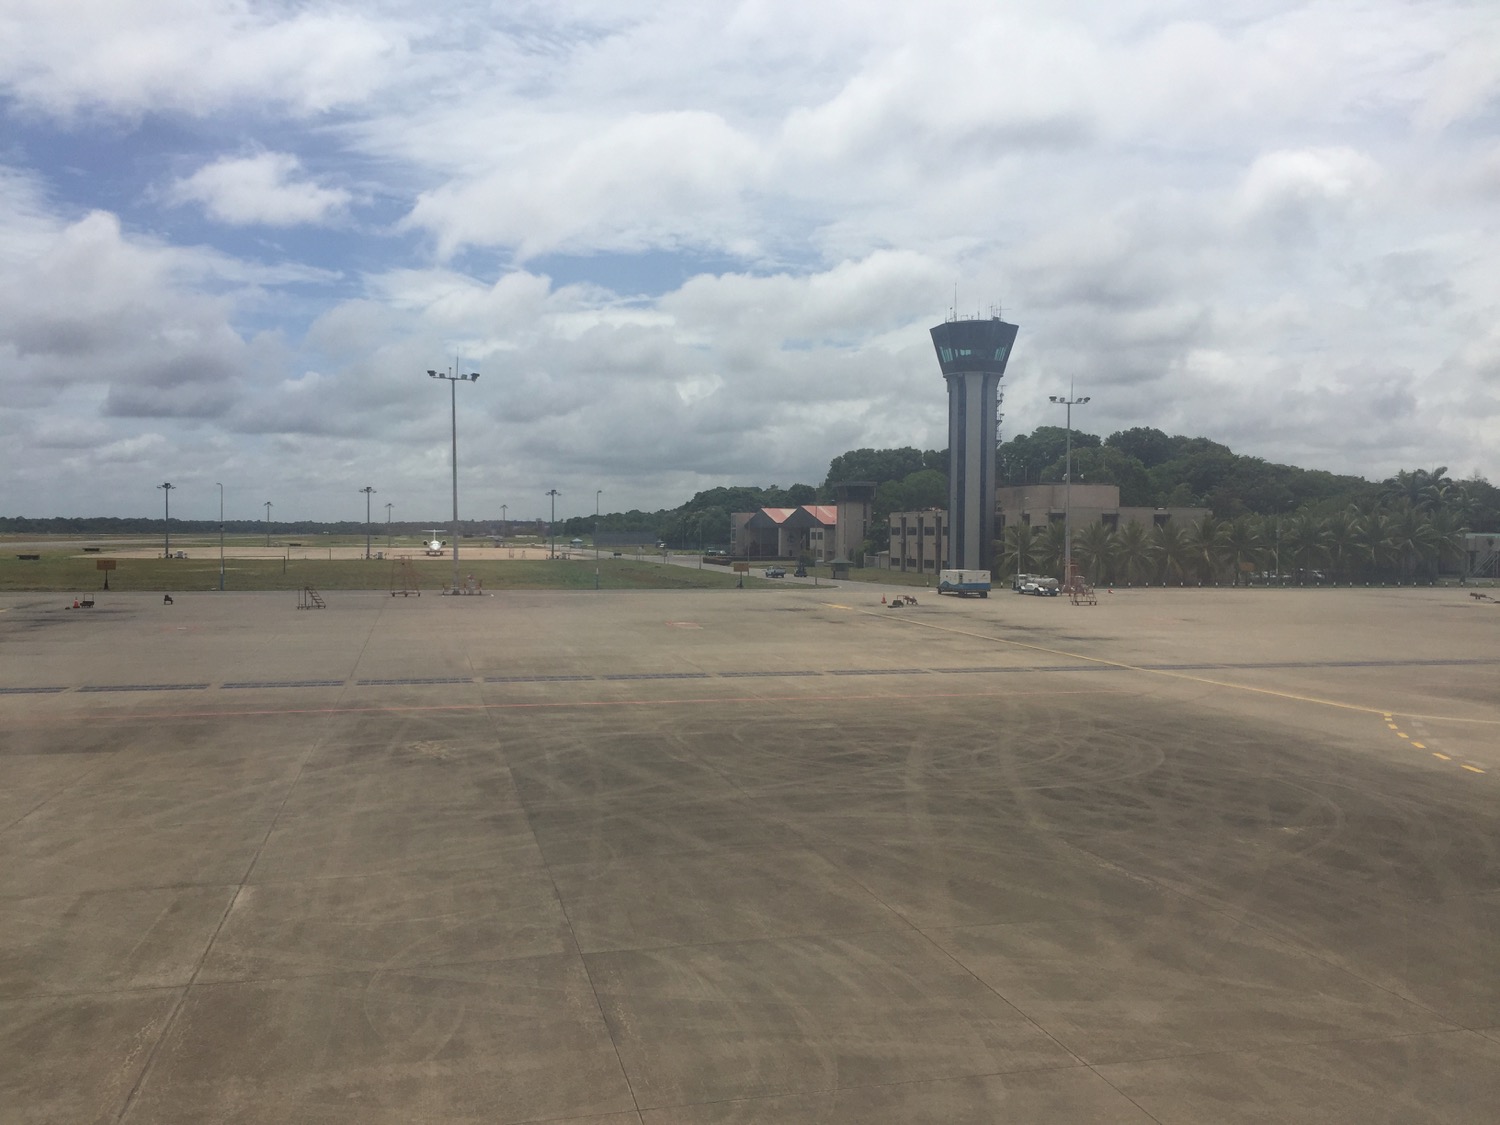 a runway with a tower and trees in the background